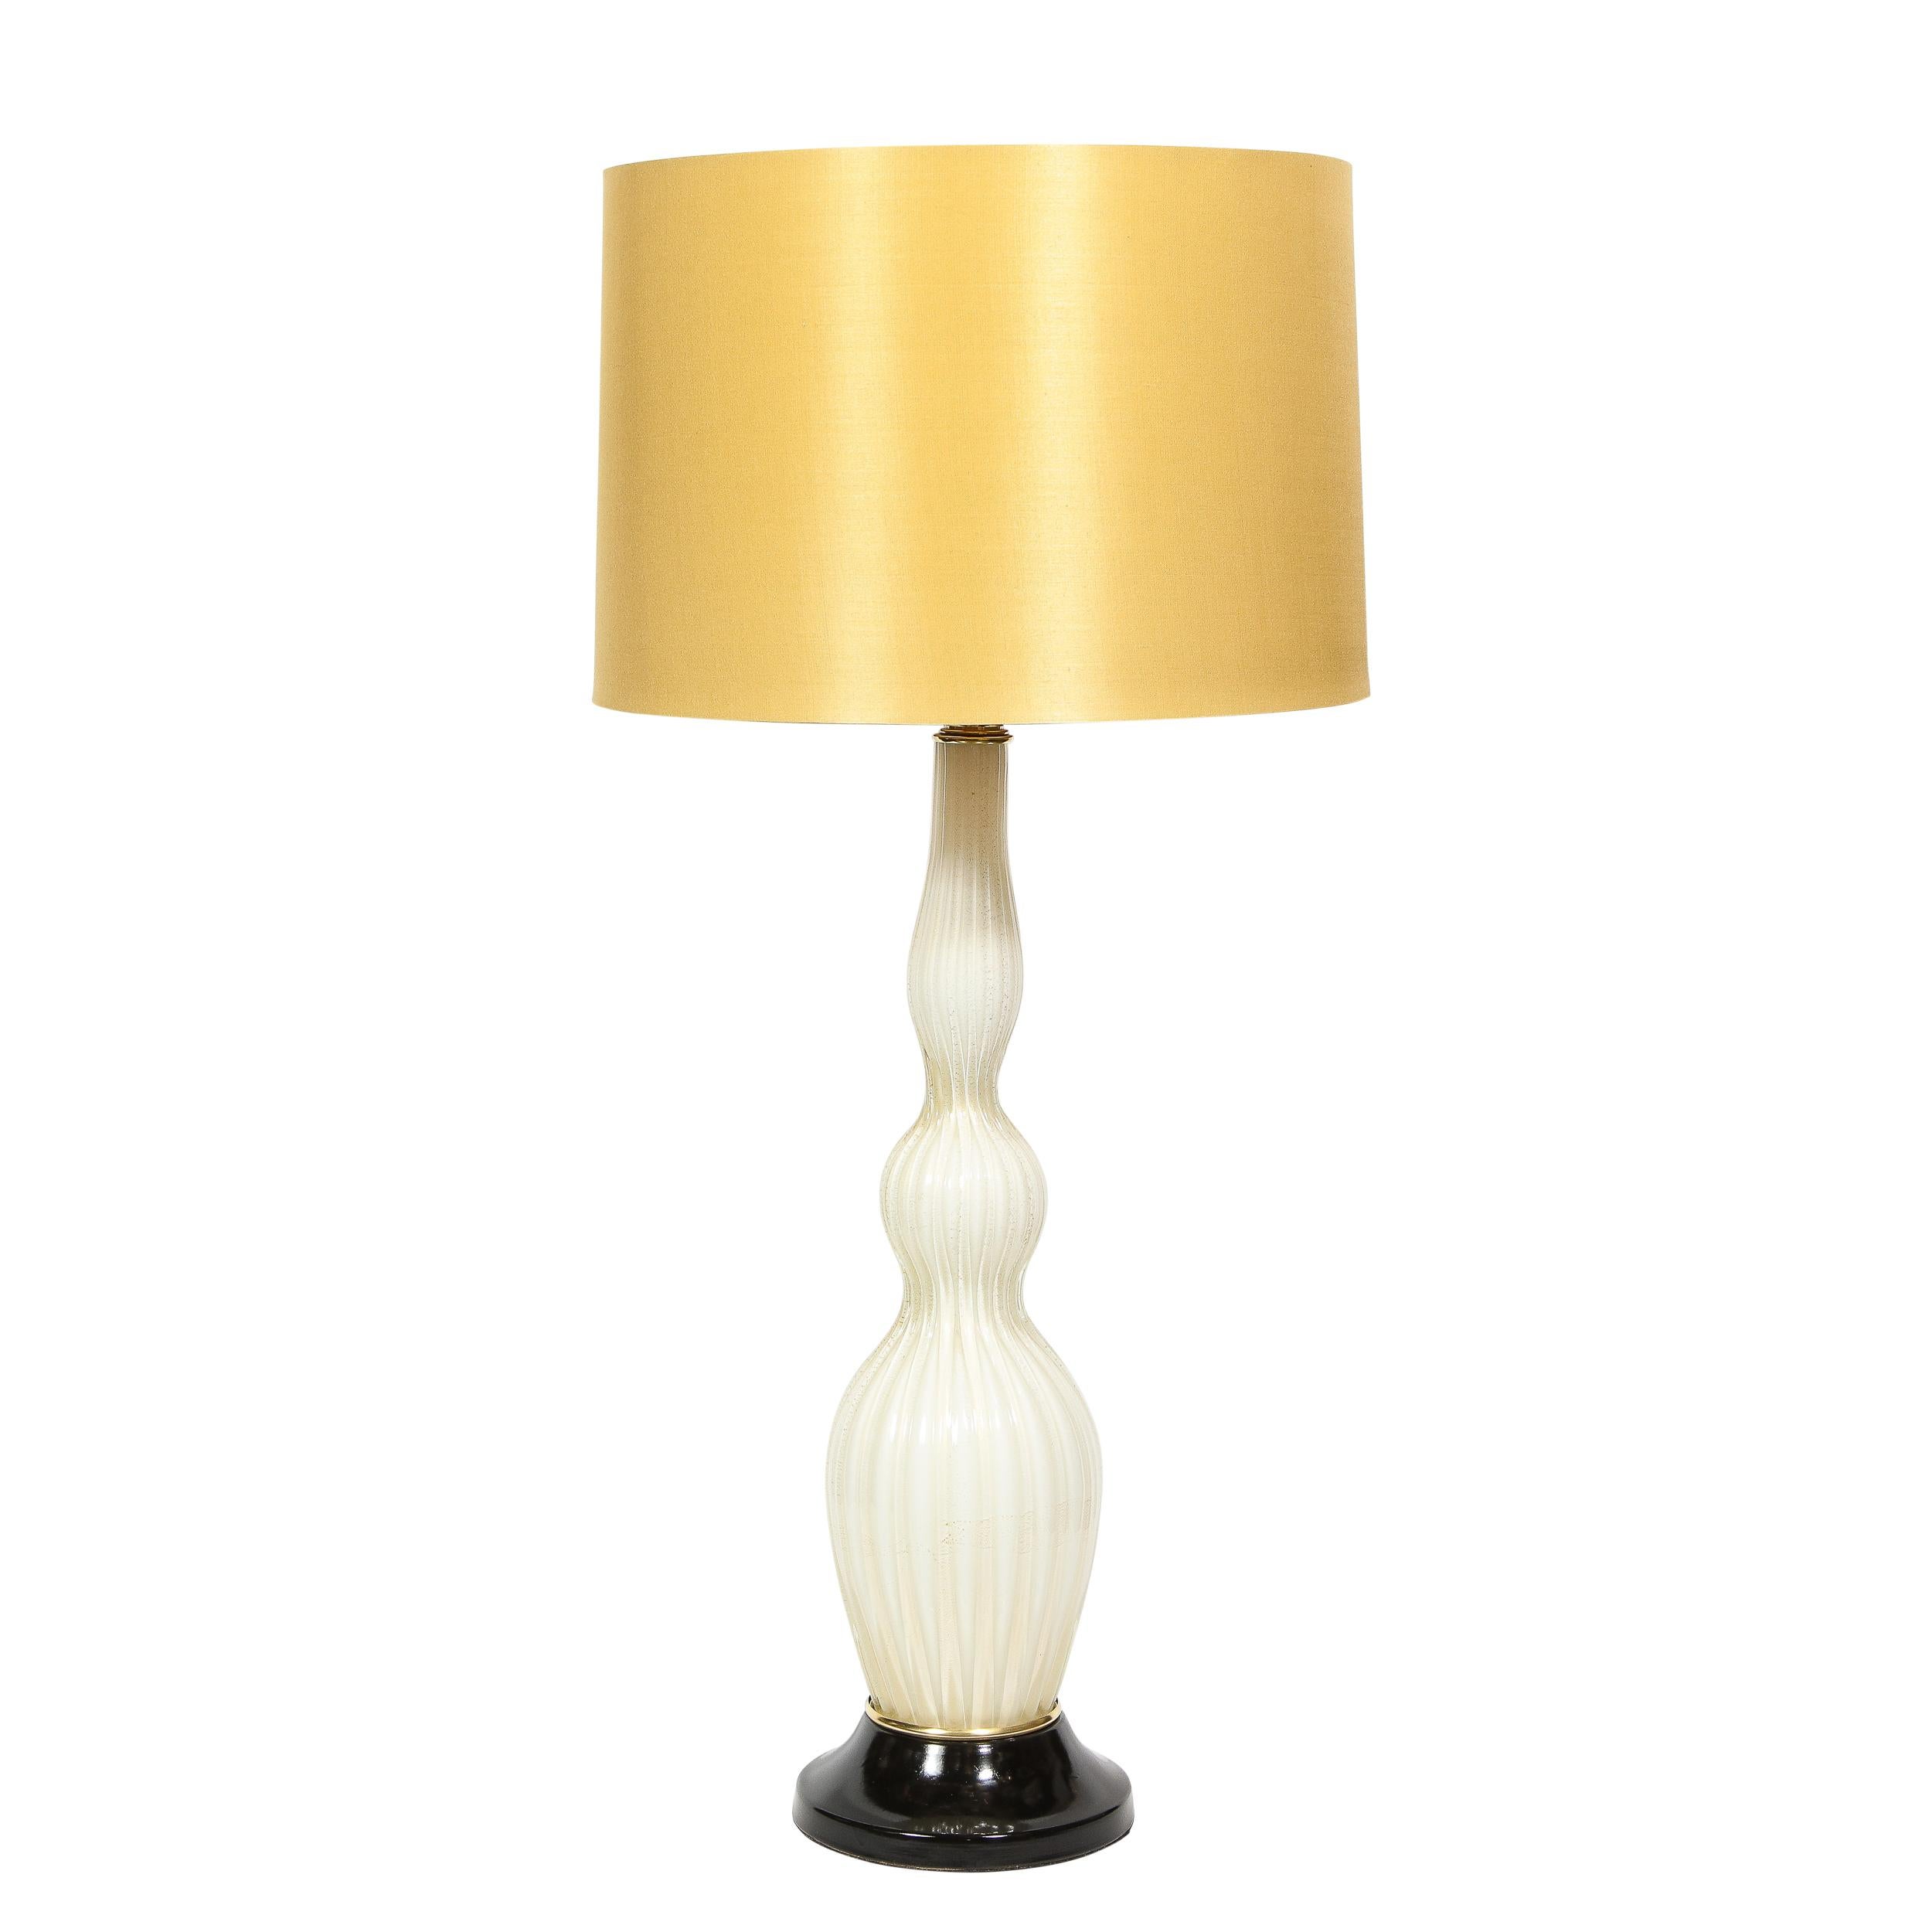 This elegant pair of Mid-Century Modern sculptural table lamps were realized in Murano, Italy- the island off the coast of Venice renowned for centuries for its superlative glass production, circa 1950. They feature undulating channeled bodies in a